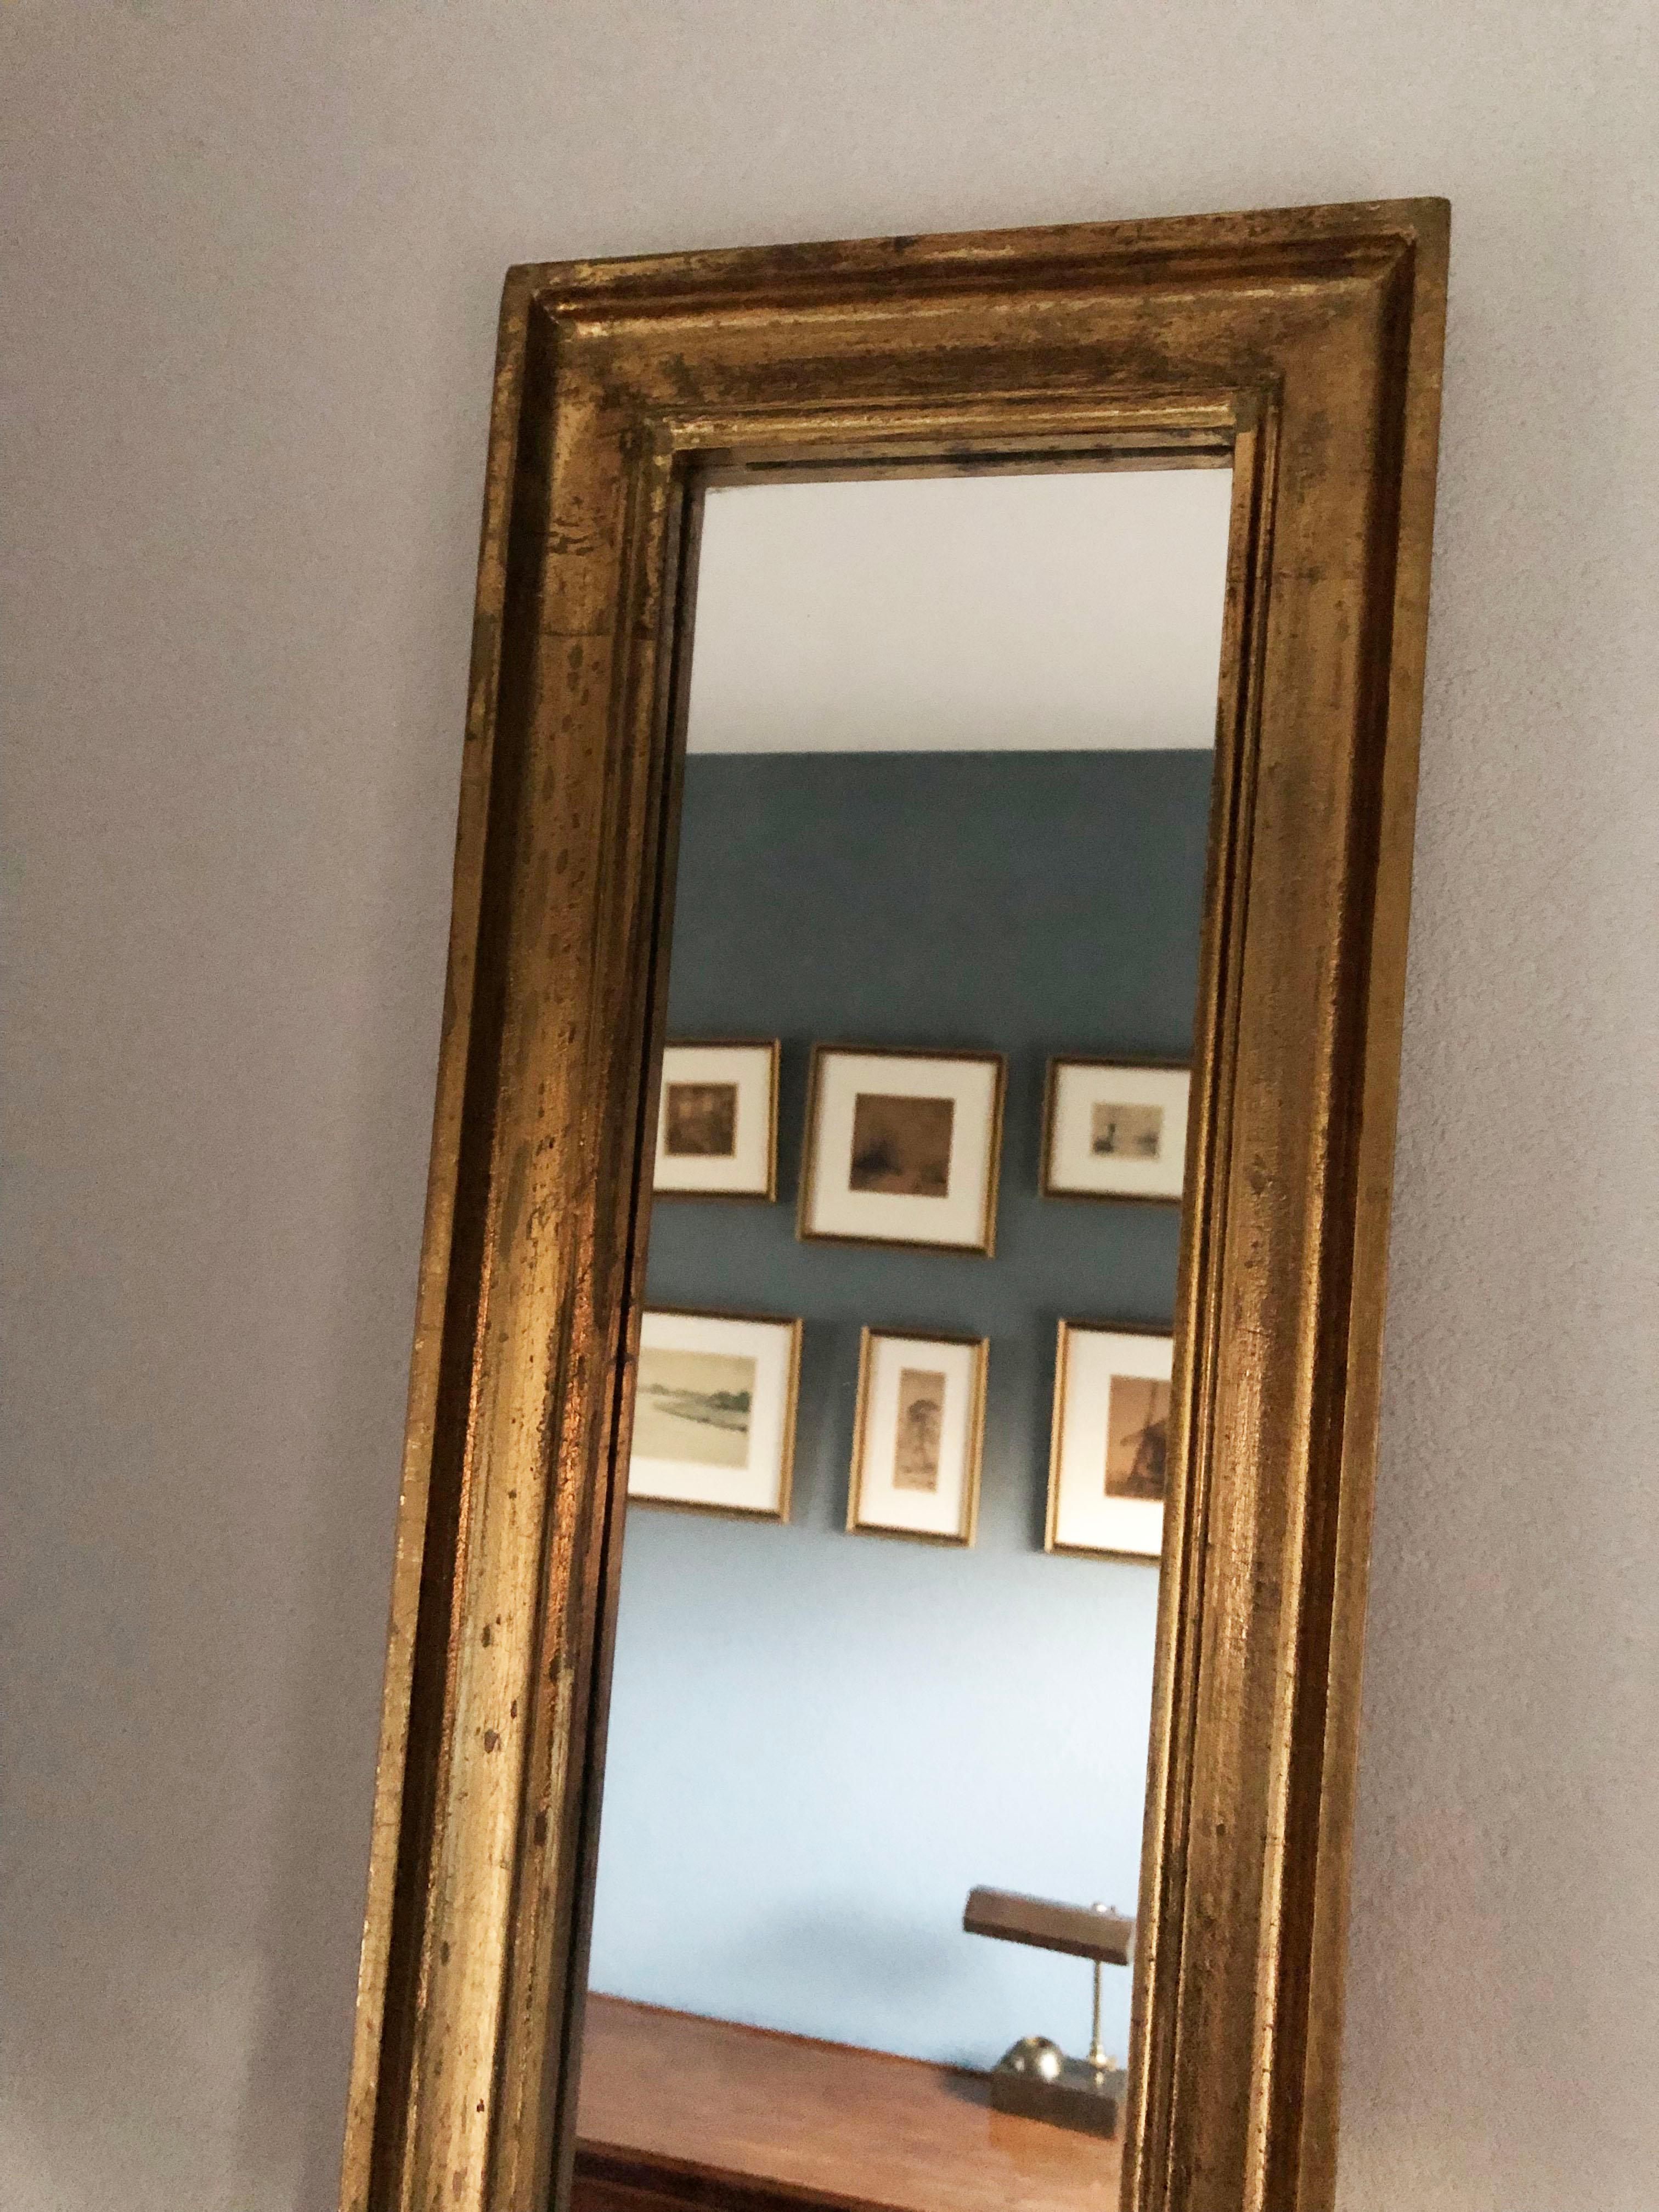 3 Very long (2 mtr) gilded full-length mirrors in good condition. The frame is nicely weathered, which gives it an older look. 2 mirrors are identical and 1 has a very small almost invisible adjustment in the edge. The mirrors have a hanging